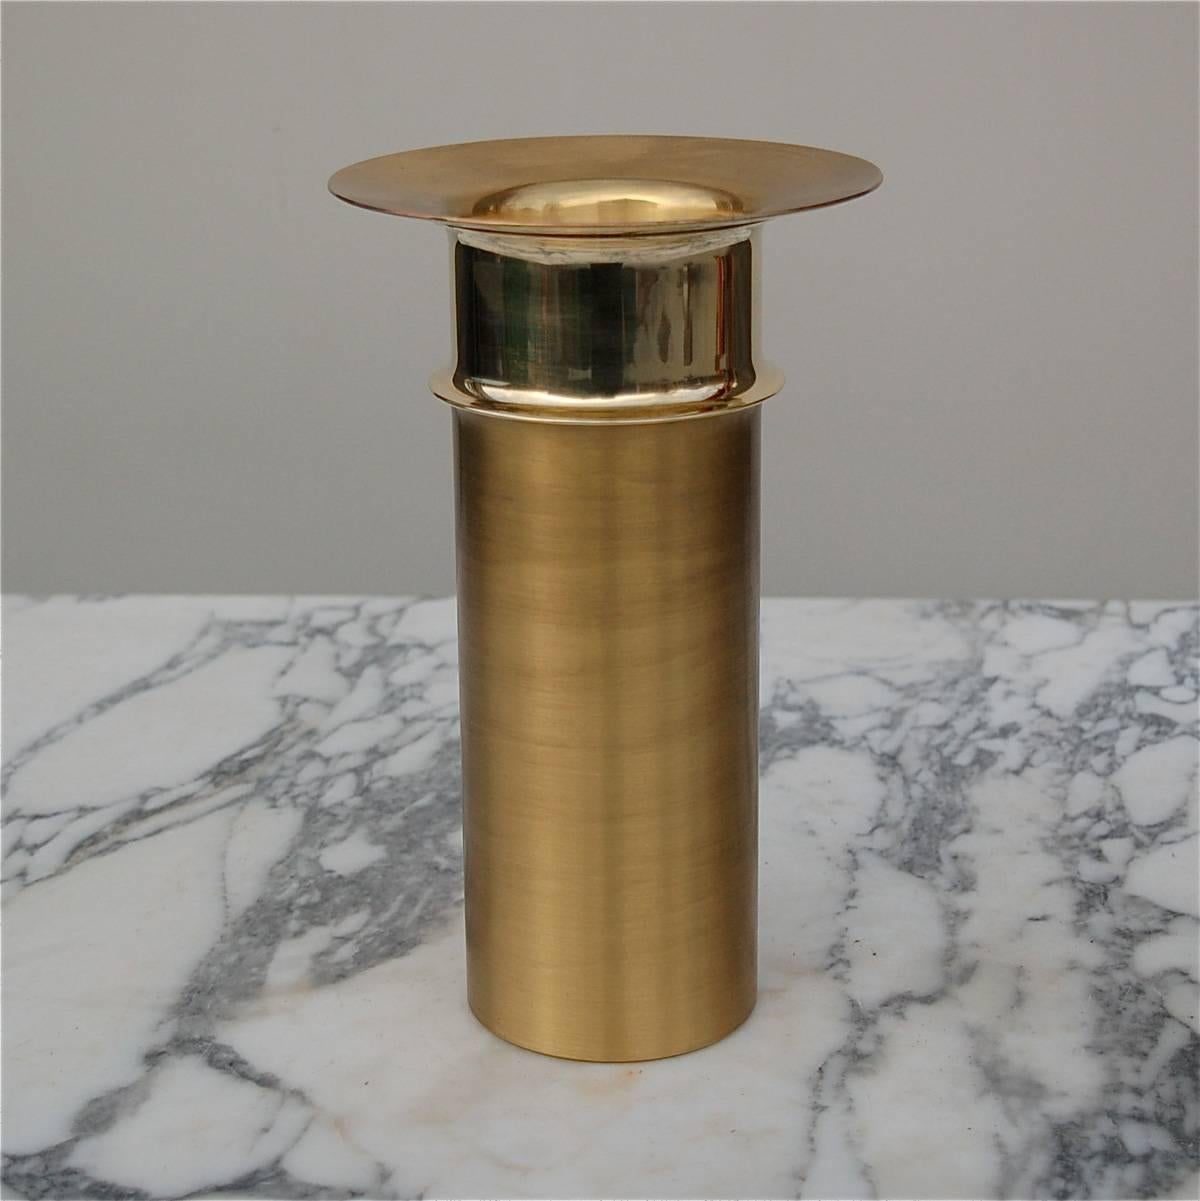 Single weighty brass candleholder or candlestick designed by Finish artist Tapio Wirkkala for manufacturer Kultakeskus in the early to middle 1970s. Stamped on the base "Kultakeskus Oy Made In Finland, Design Tapio Wirkkala". Design series